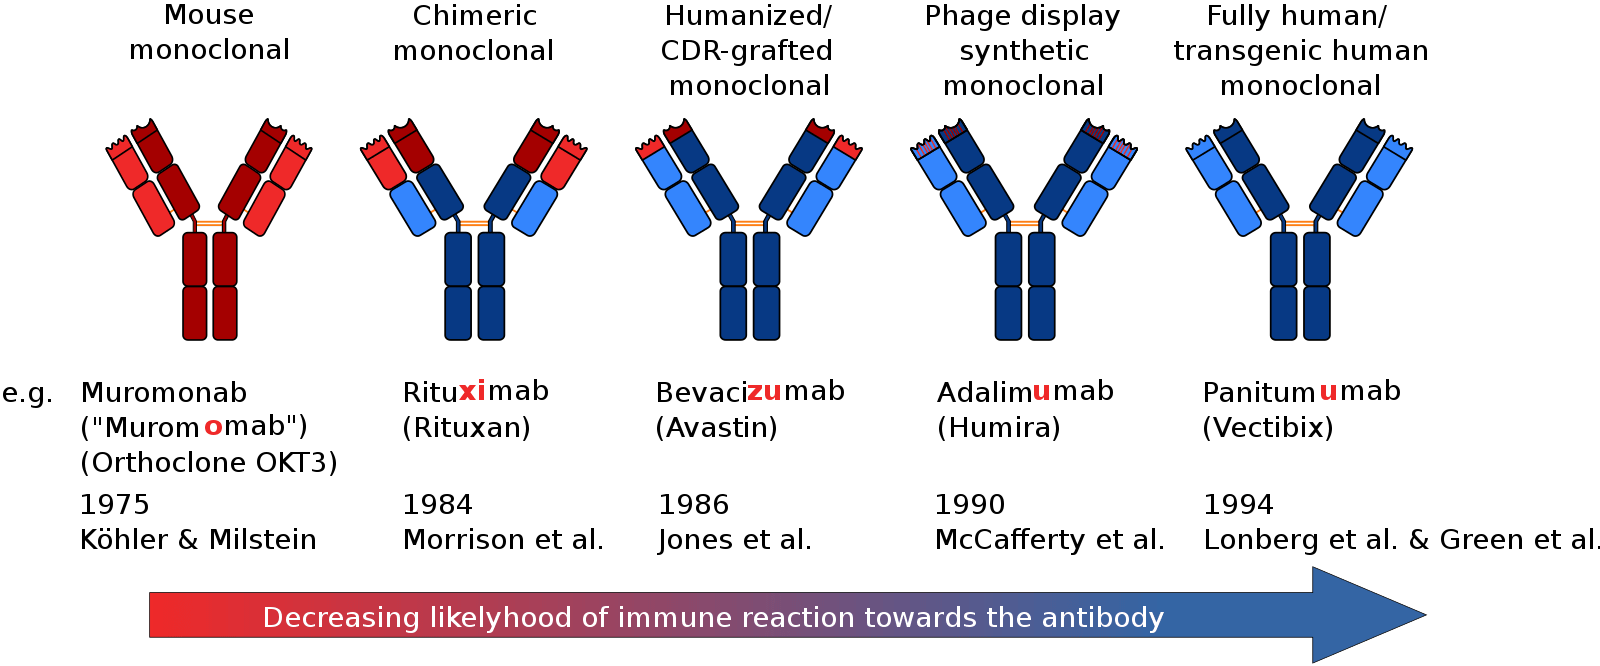 Development of better monoclonal antibodies for human therapy and their nomenclature